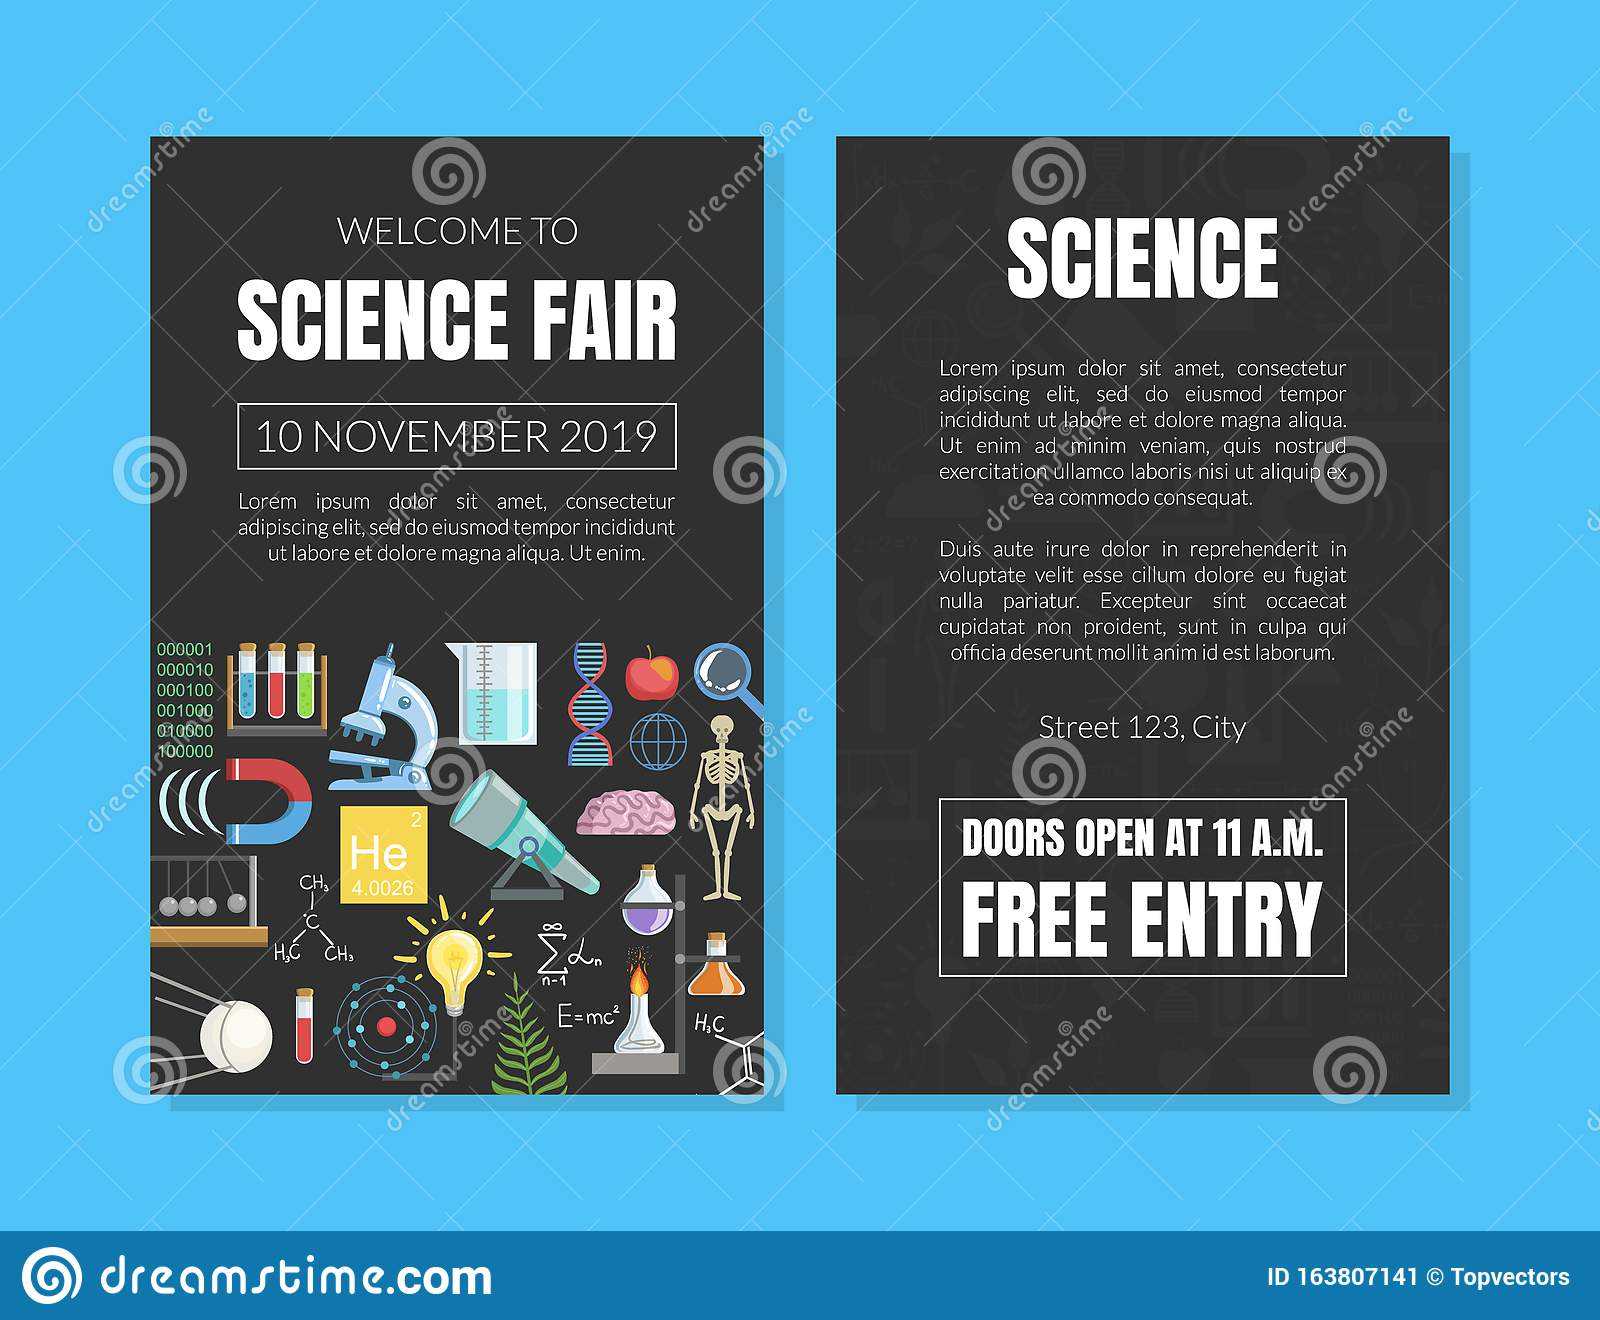 Welcome To Science Fair Invitation Card Template, Scientific Inside Science Fair Banner Template